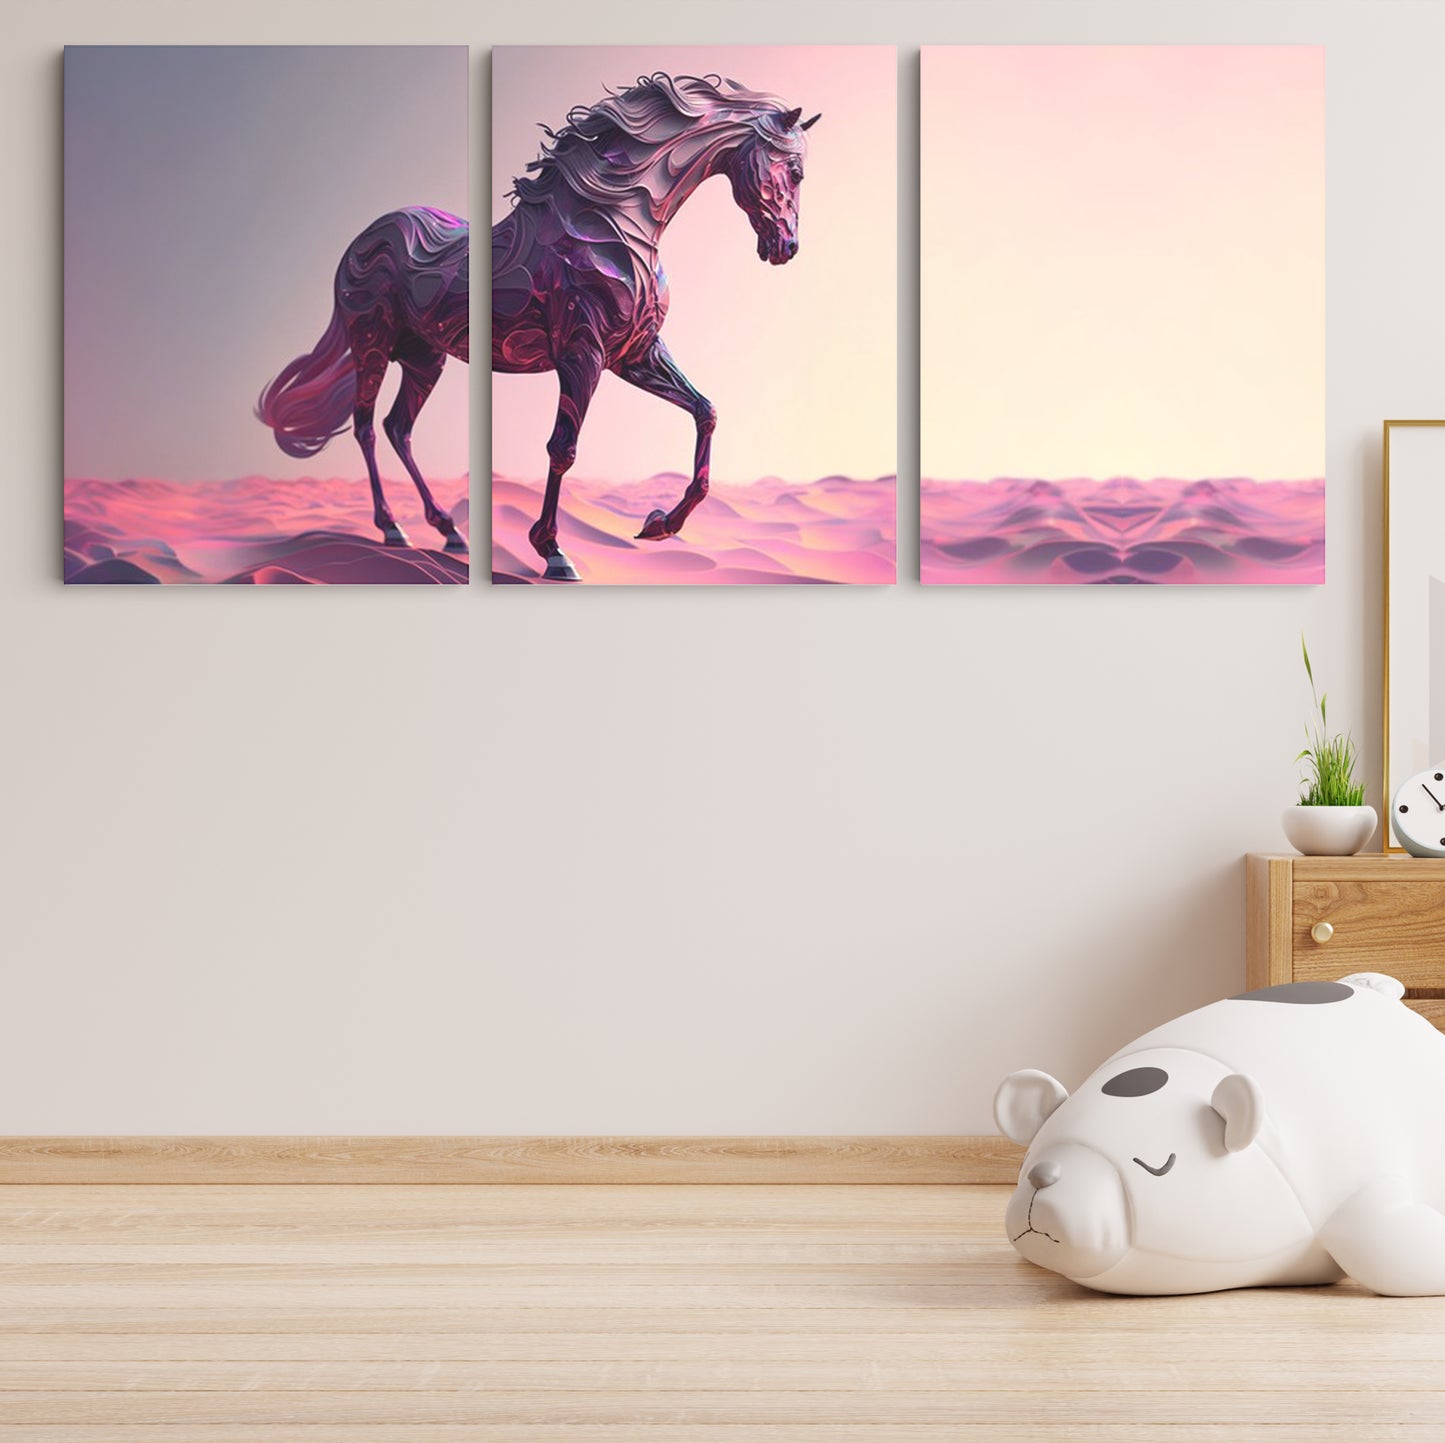 Purple Majesty: A Wall Art Showcasing an AI Horse in Enchanting Shades of Lavender - Celebrate the Fusion of Technology and Equine Elegance - S05E67